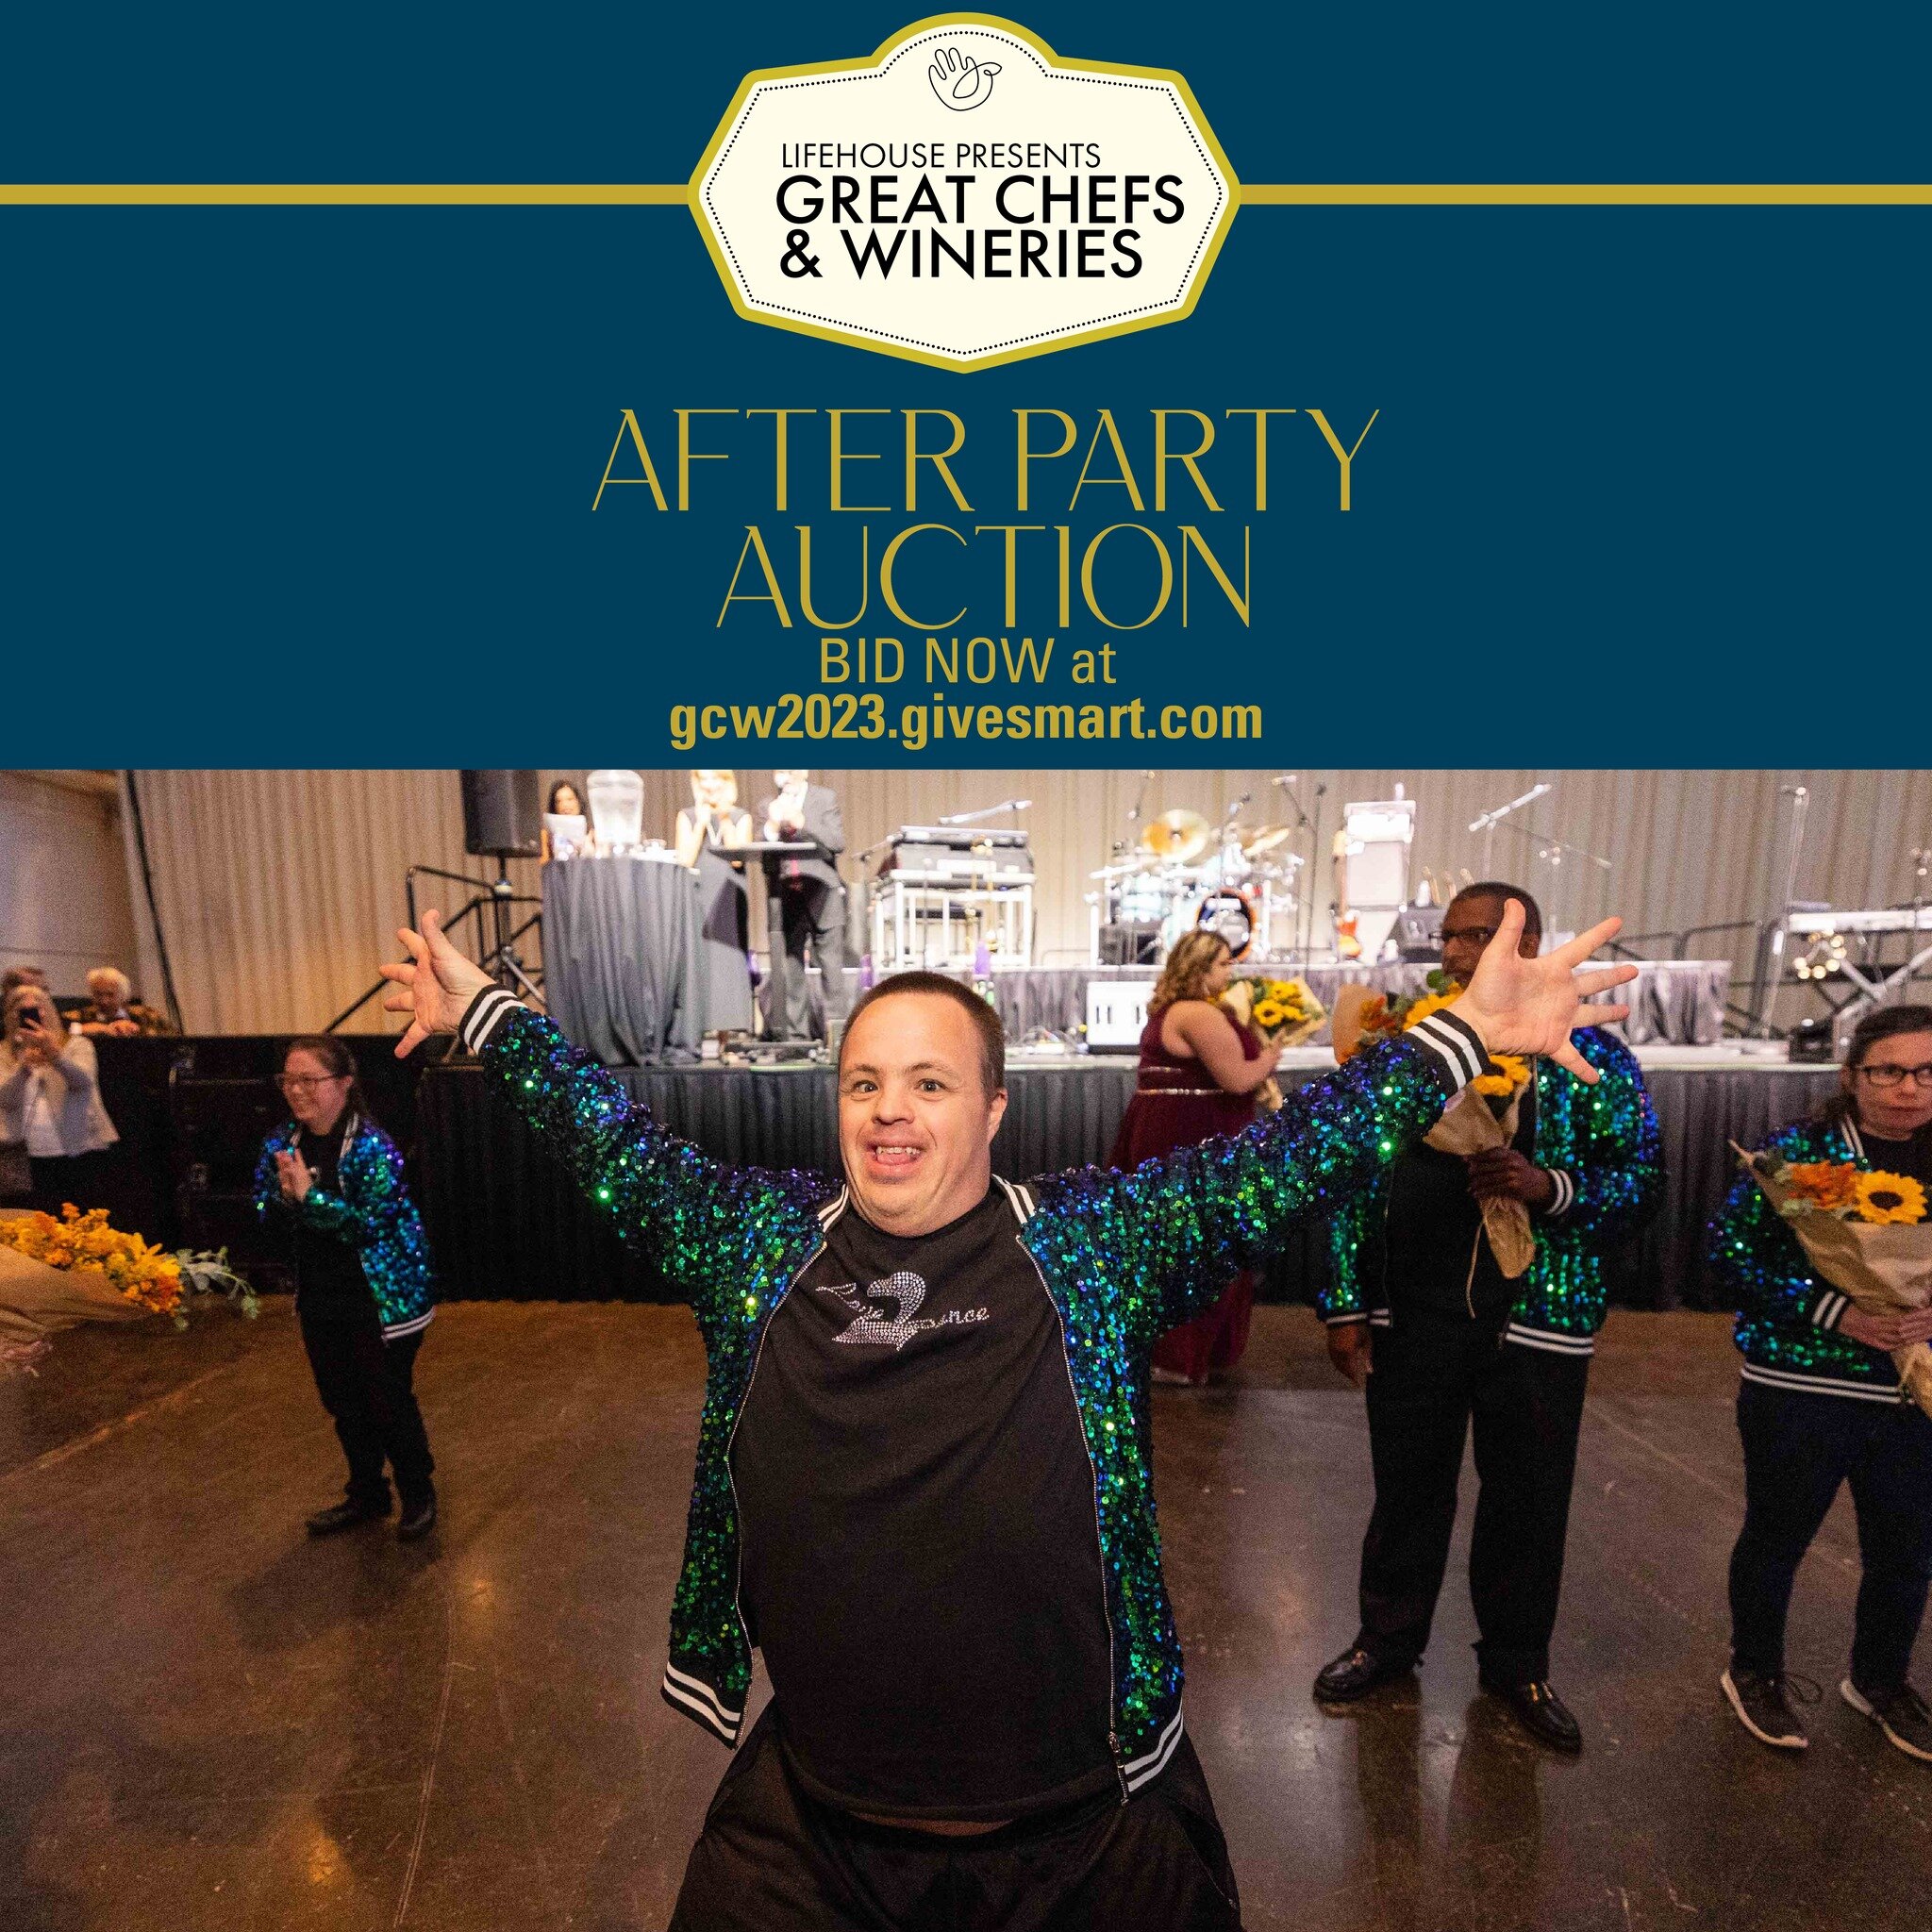 Kick off your weekend by bidding on some items to support Lifehouse. The 'After Party' auction closes today at noon! 💥👆 #linkinbio👆 💥

#charityauction #gcw2023 #greatchefsandwineries #nonprofitfundraiser #nonprofitgala #bestincounty #bestmarinnon